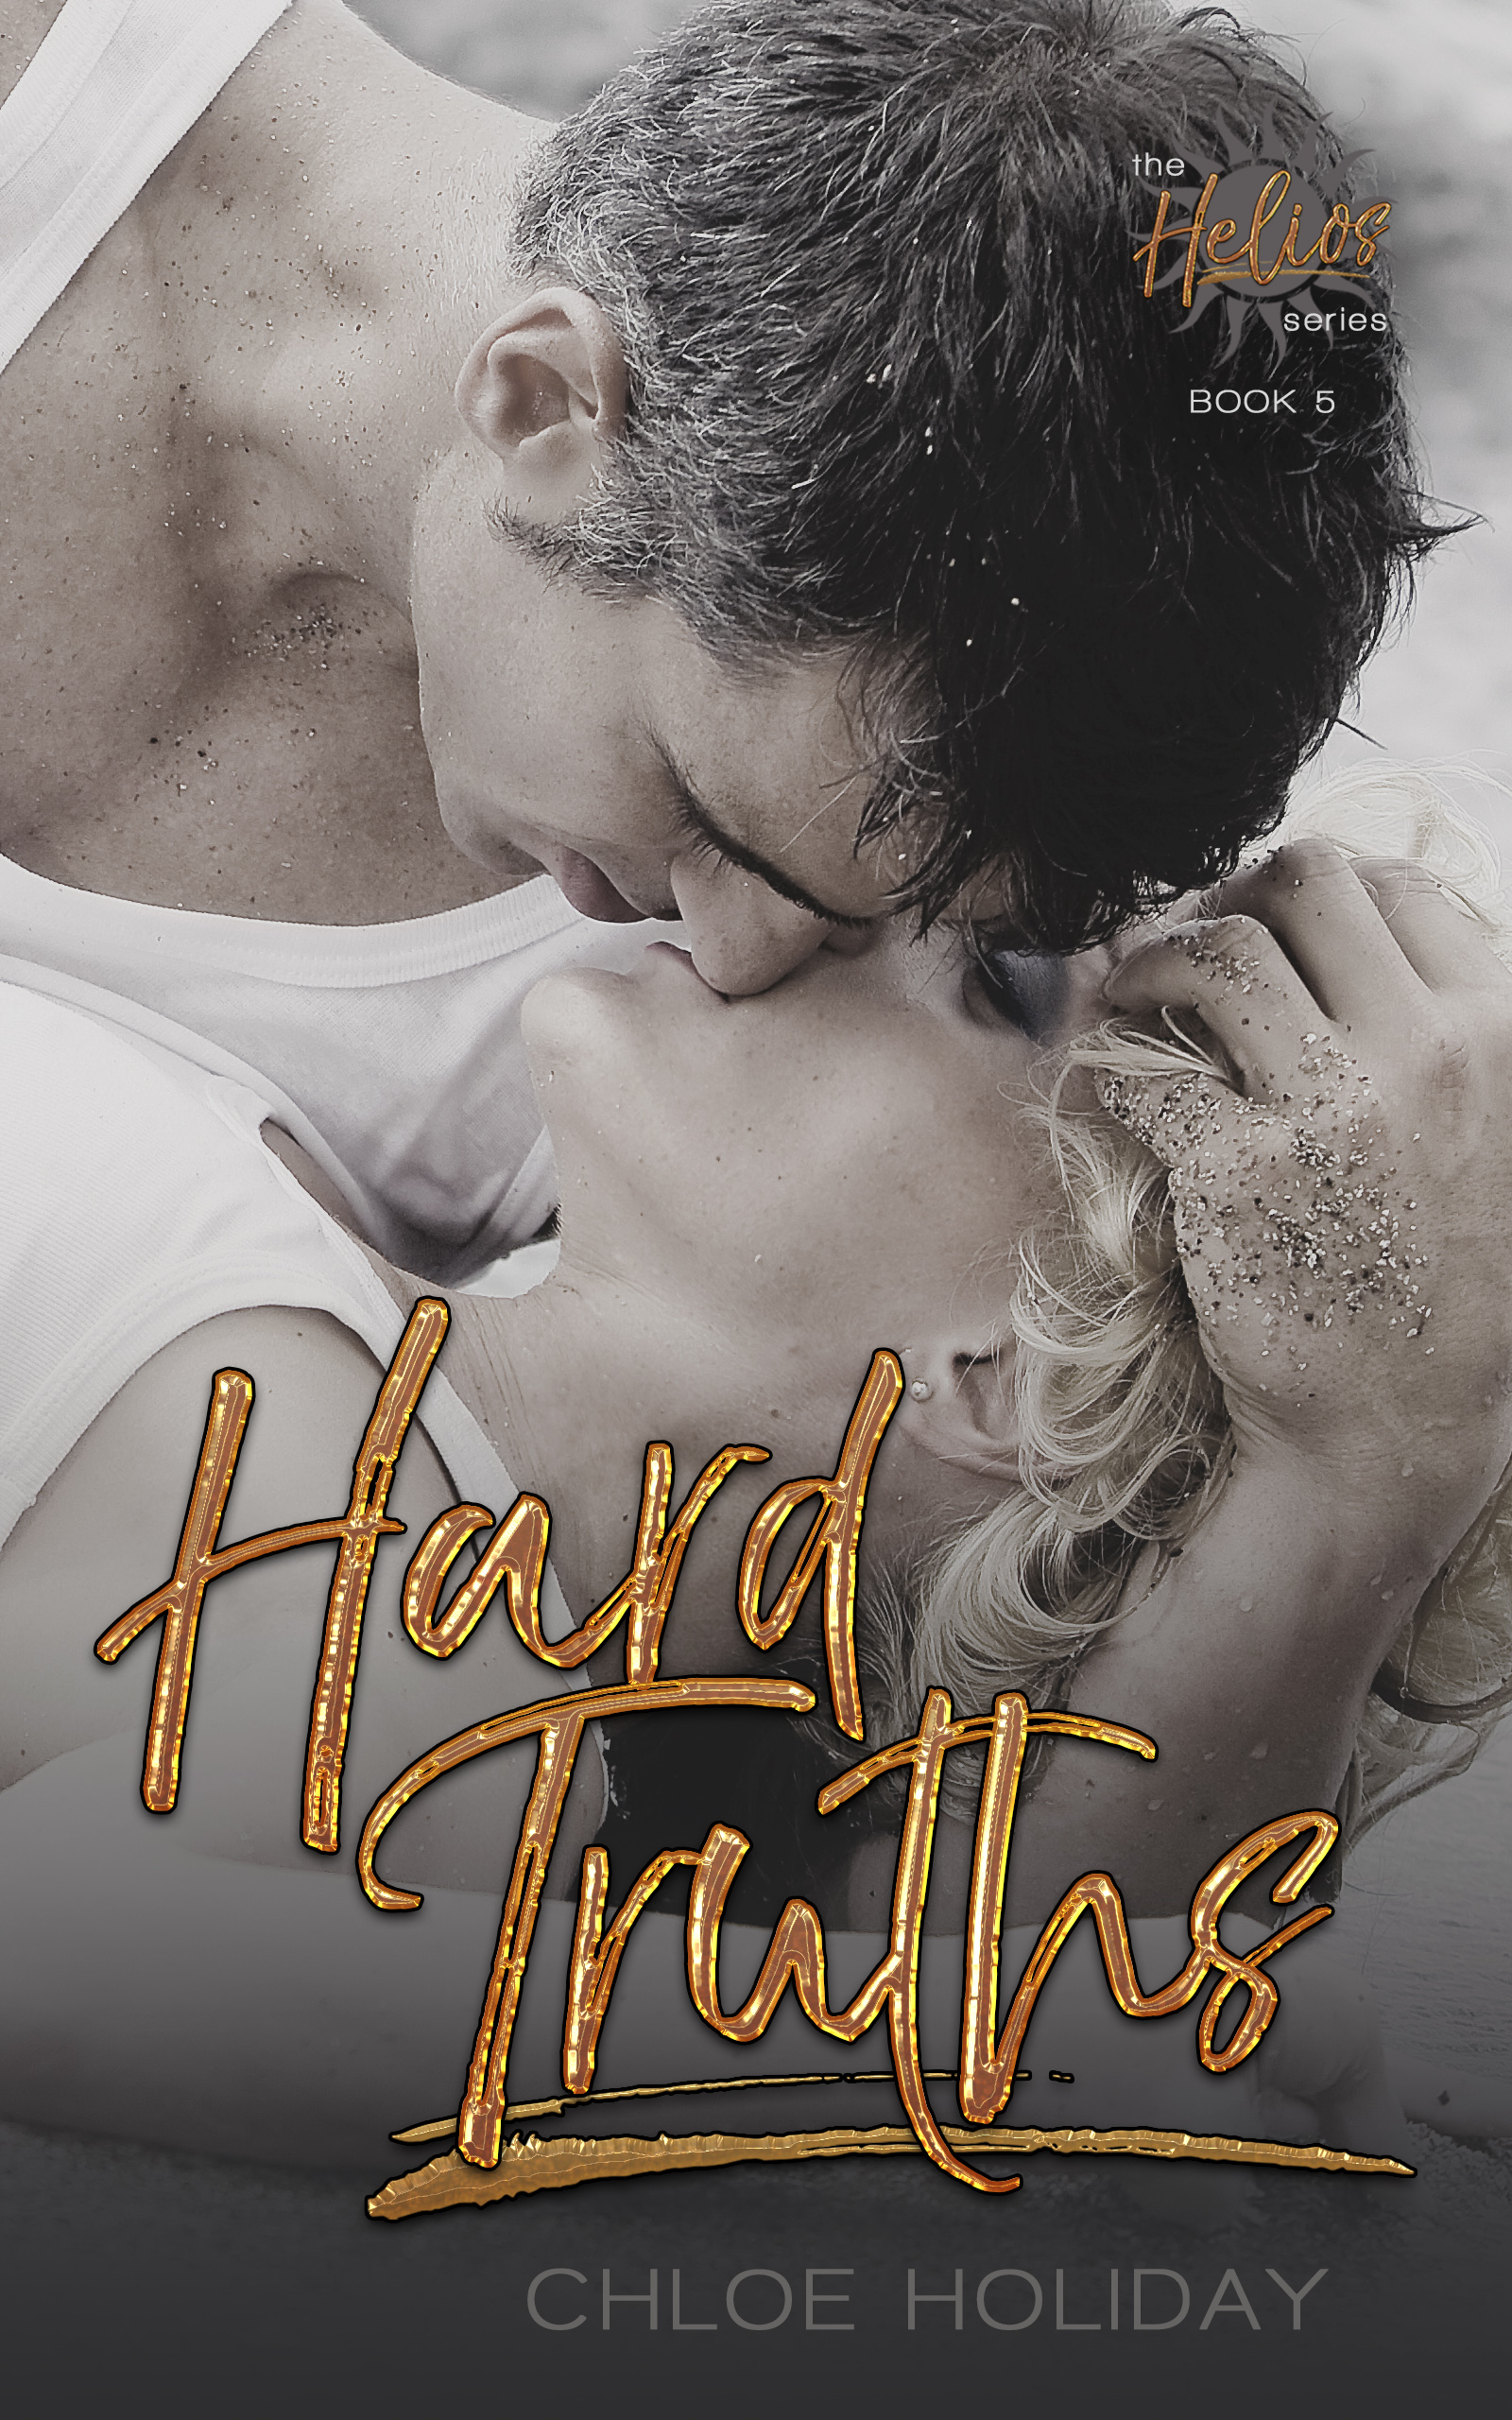 Hard Truths is an enemies to lovers, beach read romance between a Greek adventure racer and a British personal assistant.